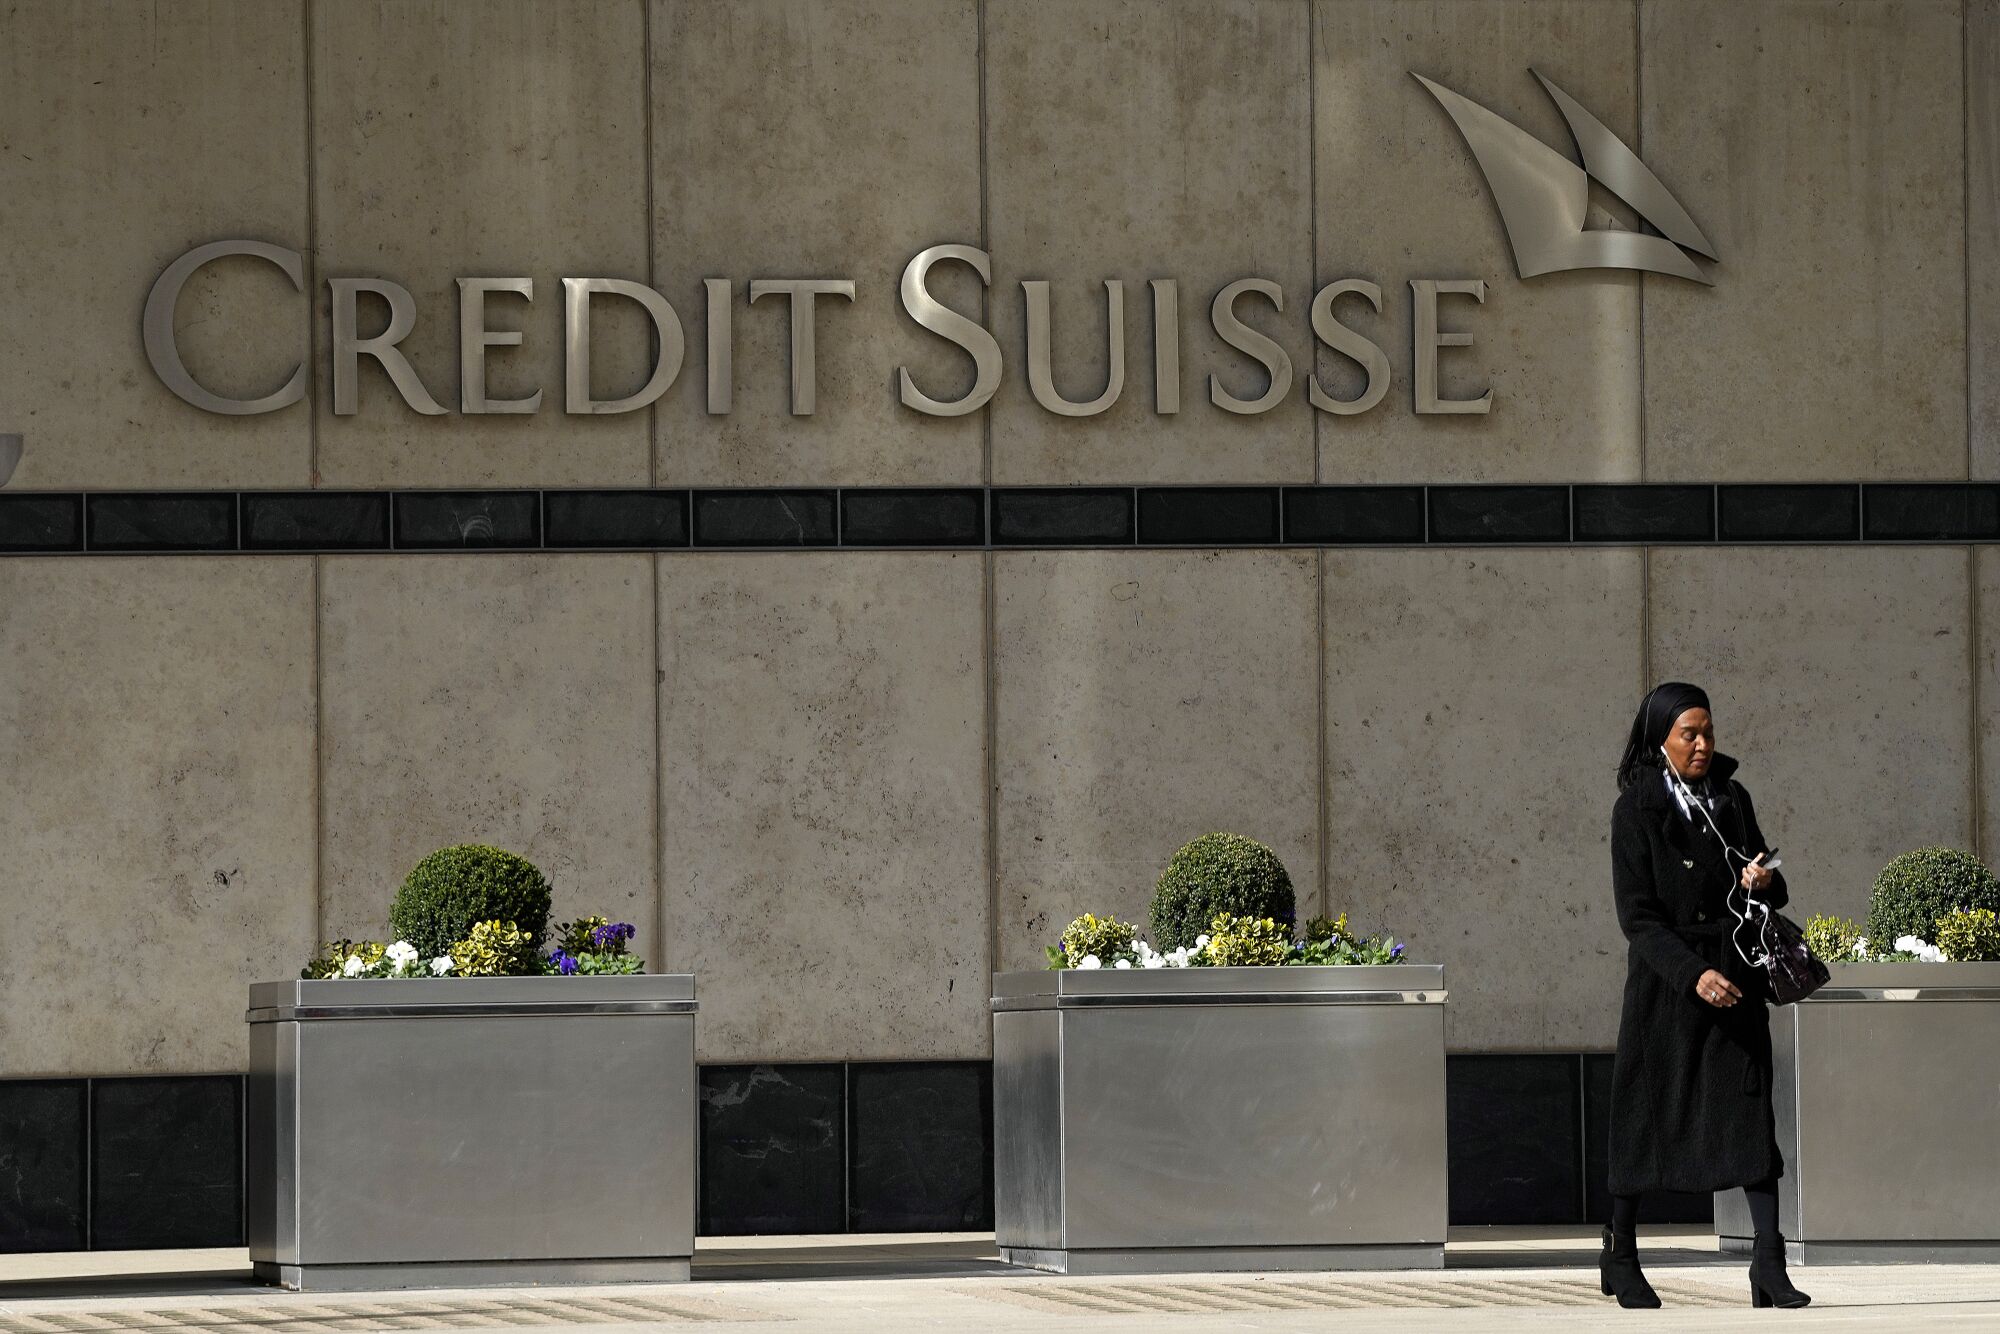 A woman walks past the Credit Suisse bank headquarters in London